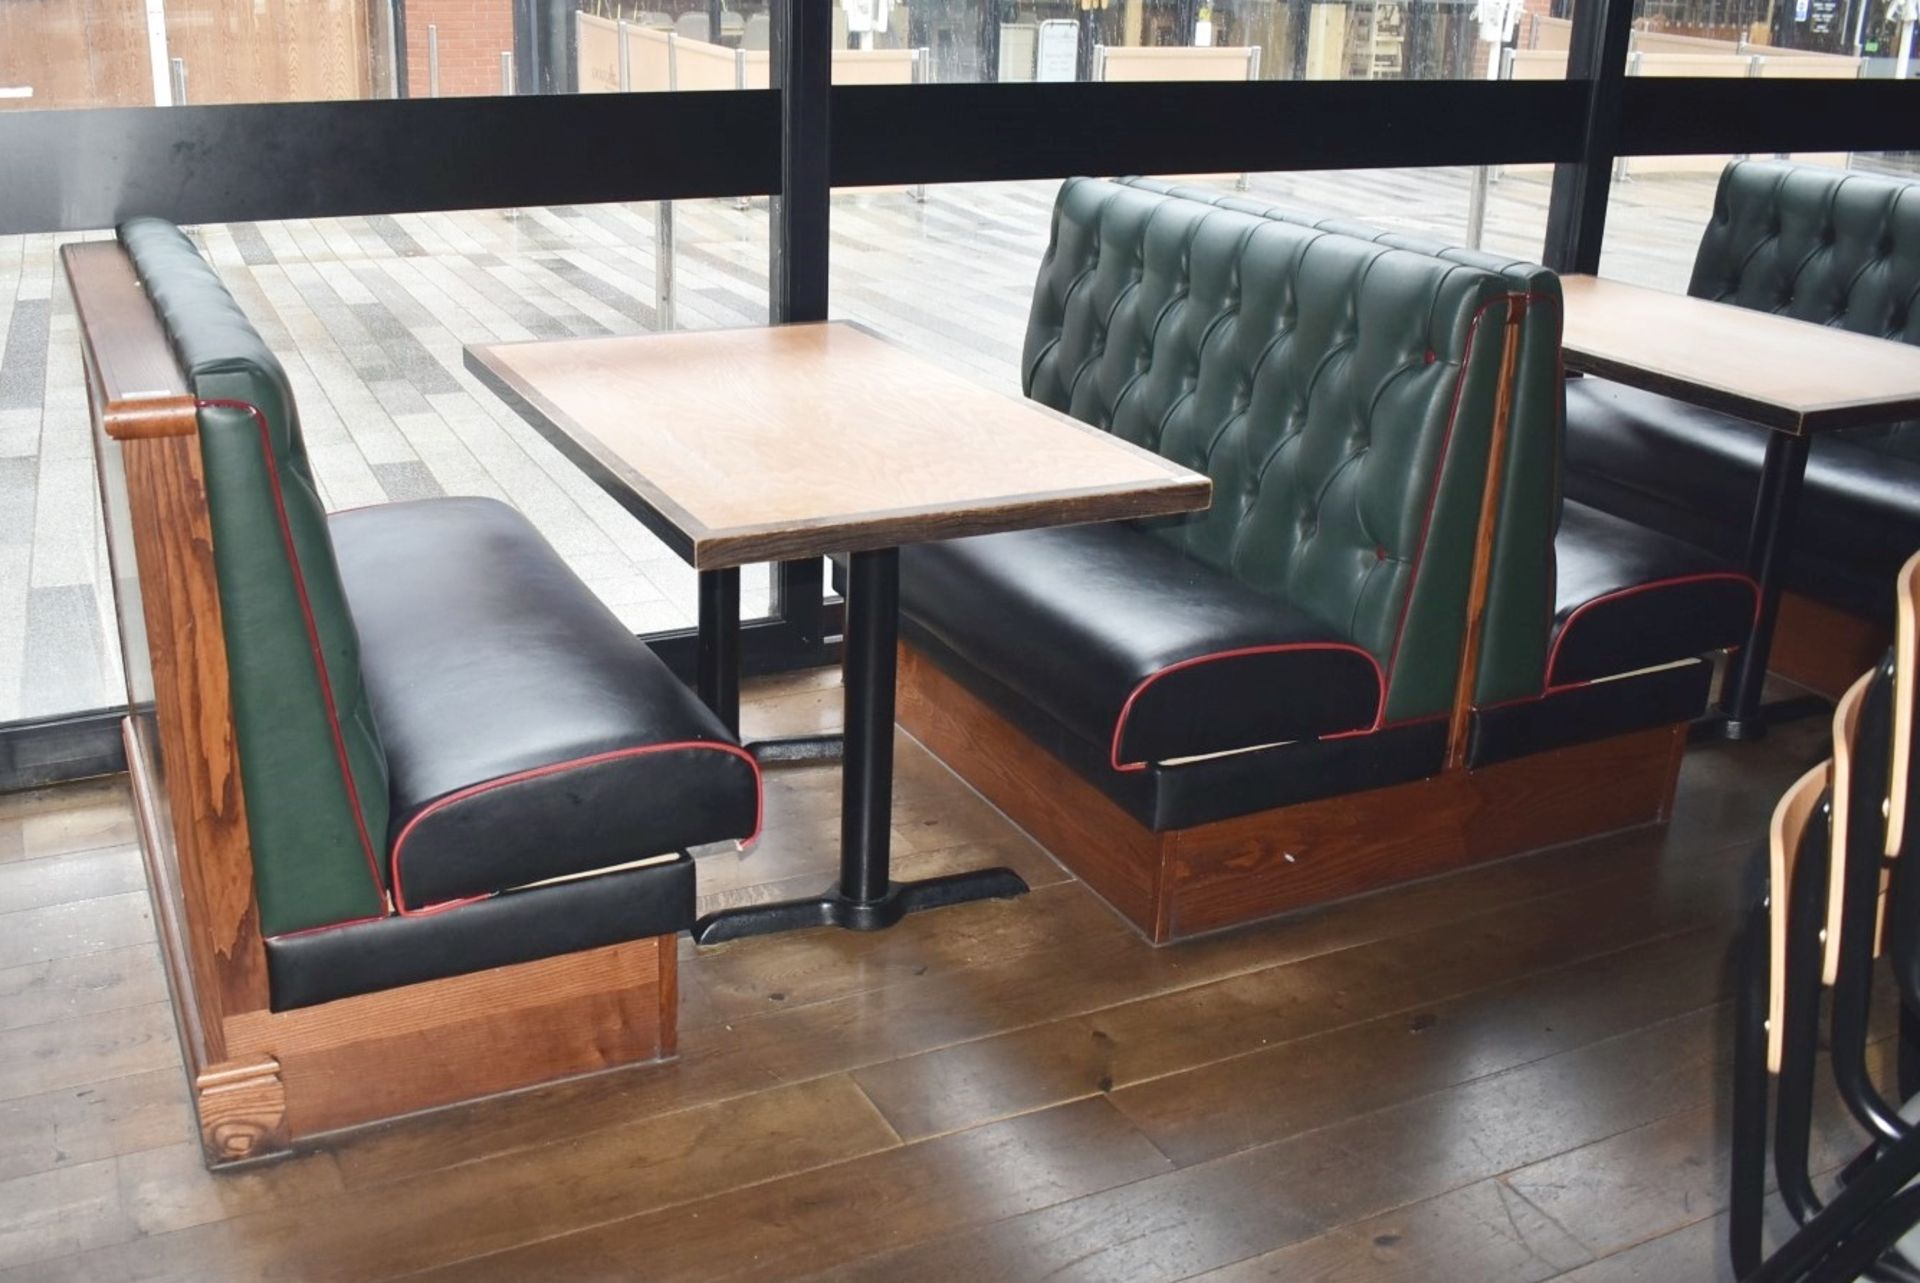 4 x Sections of Restaurant Double Booth Seating - Sits Up to 12 Persons - Green & Black Upholstery - Image 19 of 24